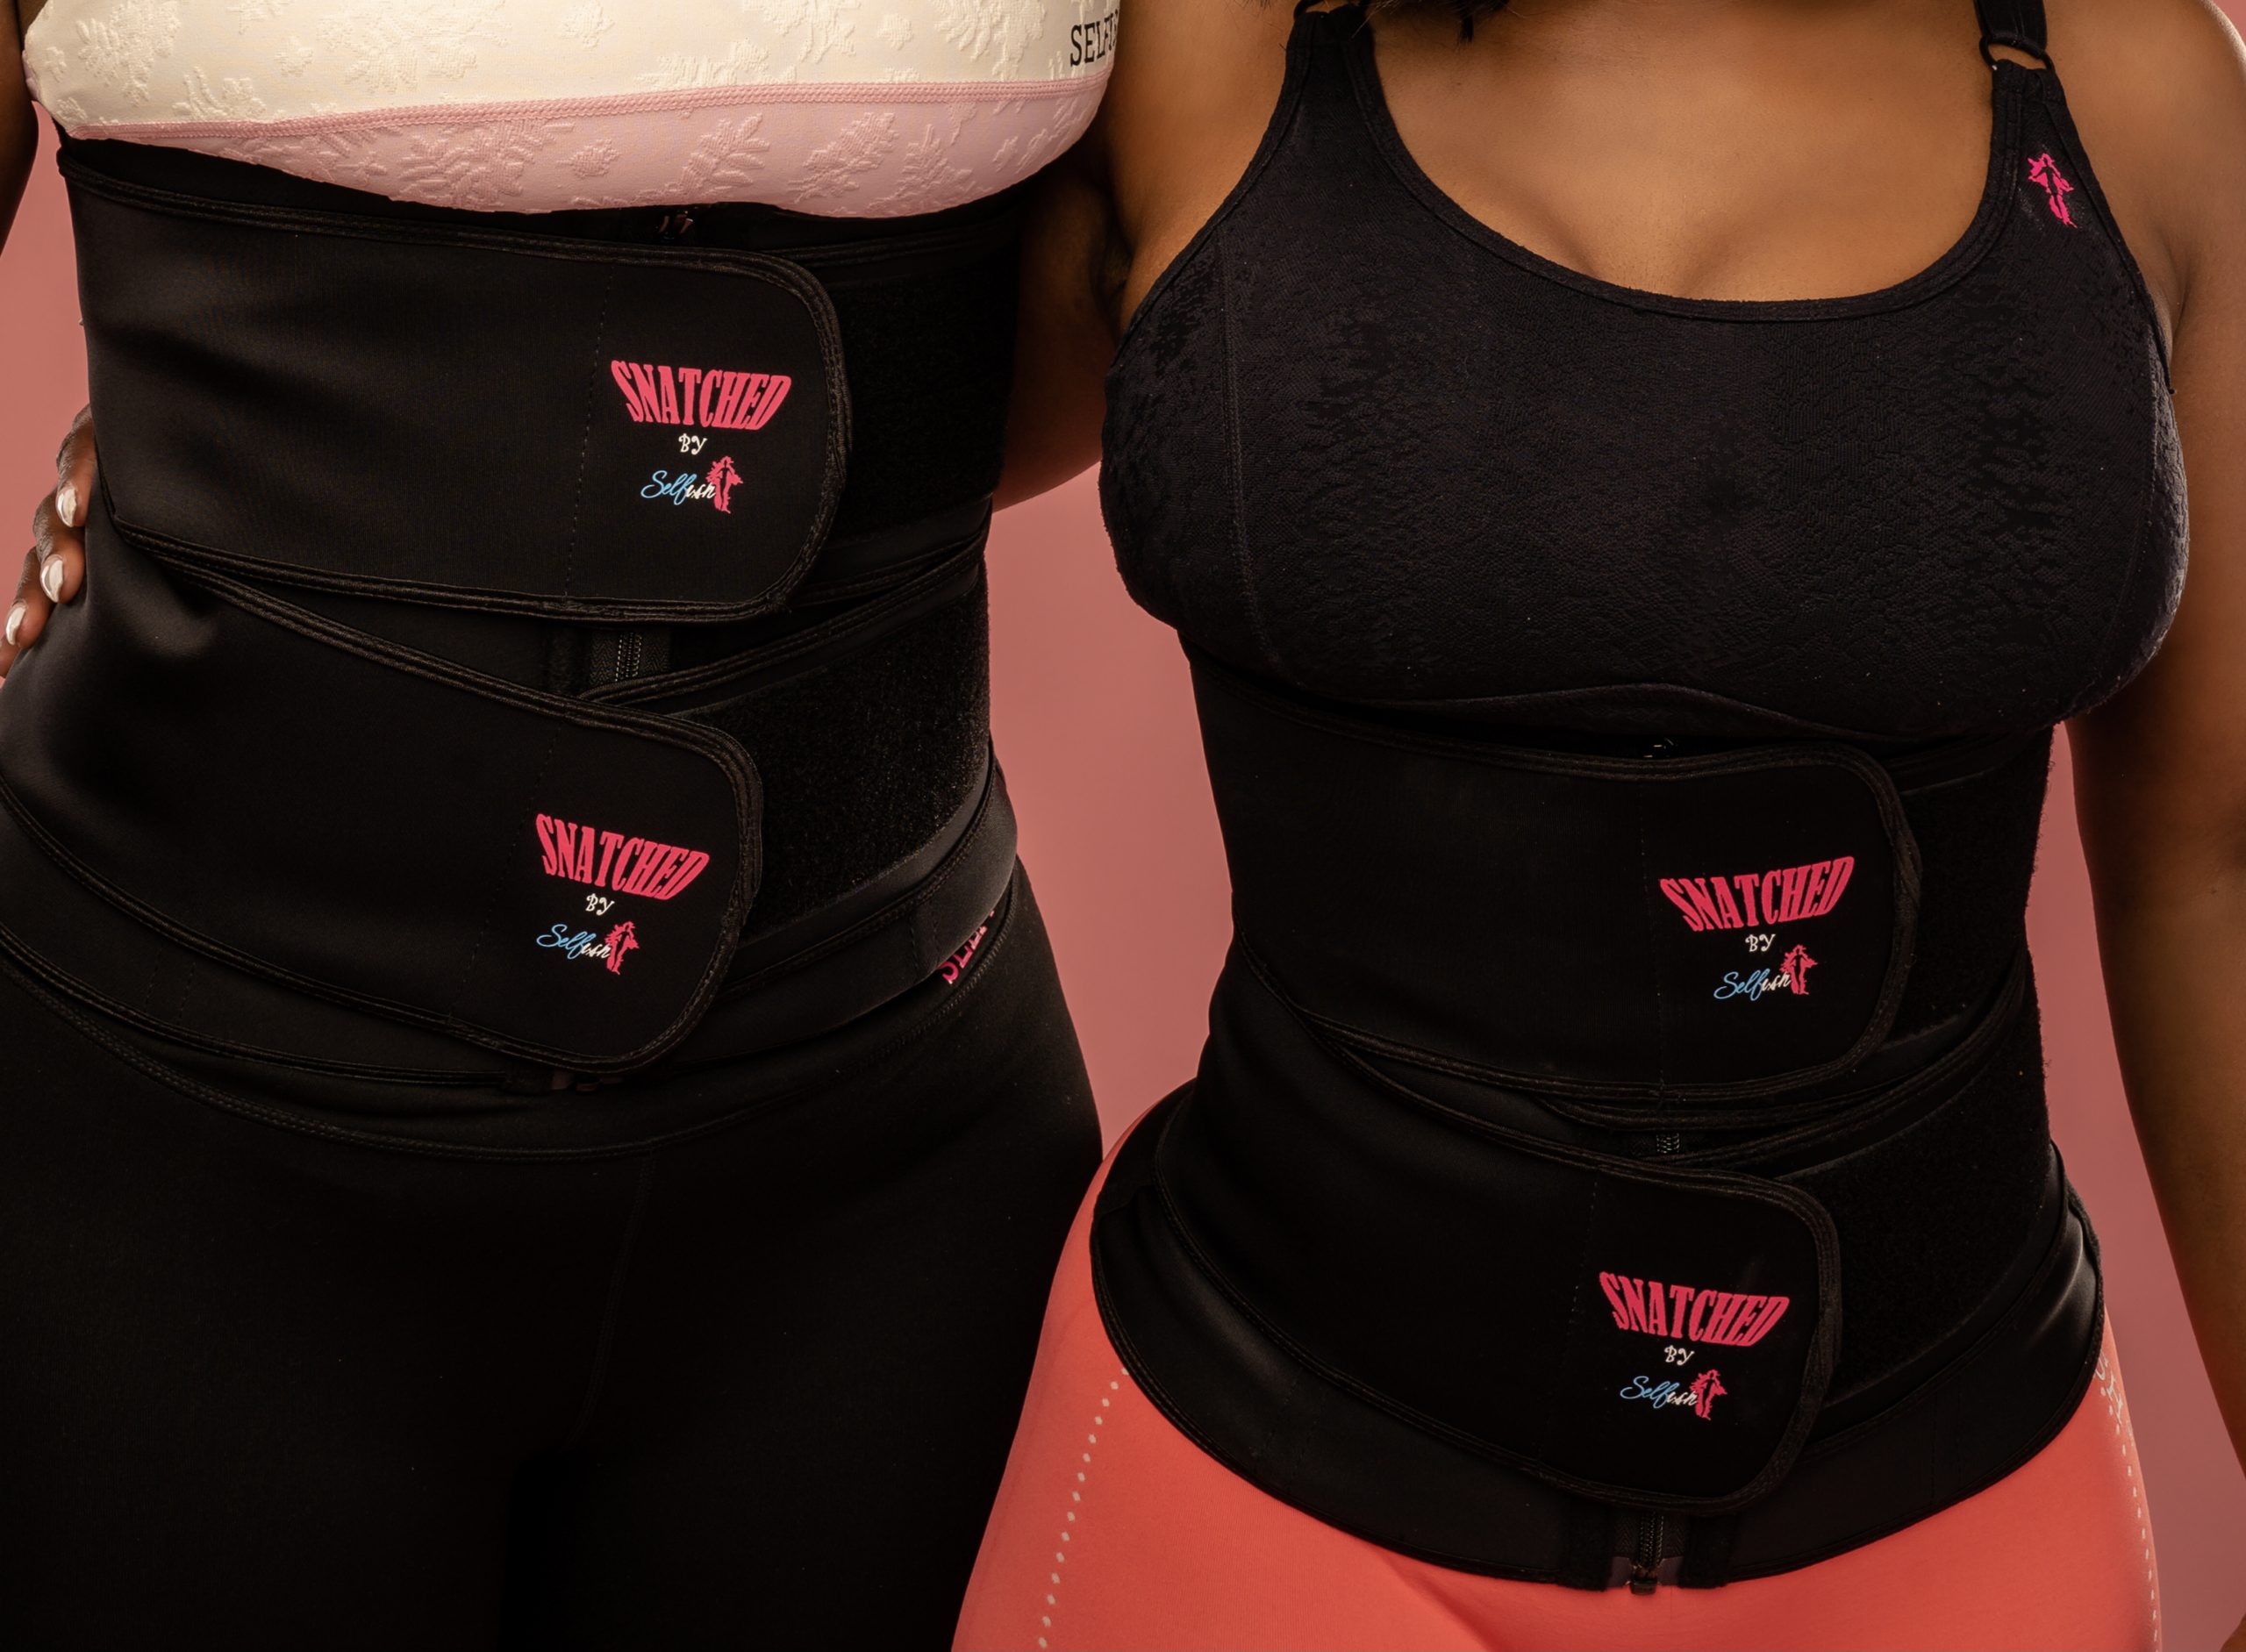 SNATCHED By Selfish Waist Slimmer - Selfish, LLC - Personal Trainer 